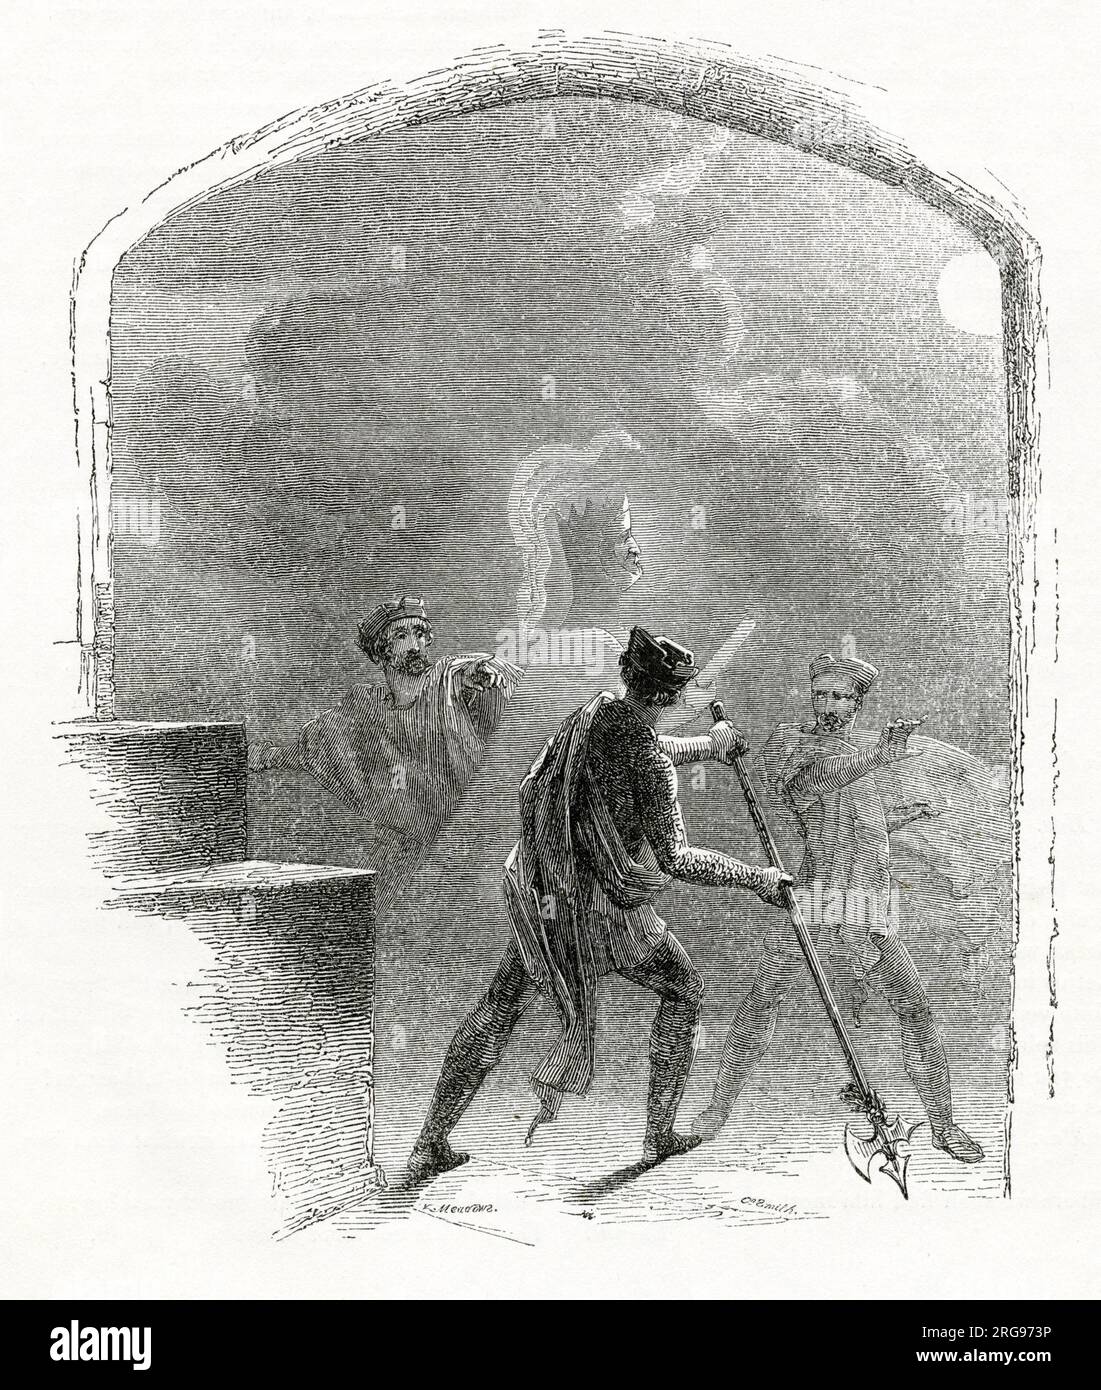 Illustration by Kenny Meadows to Hamlet, Prince of Denmark, by William Shakespeare. Scene on the battlements of Elsinore Castle, with Horatio and guards alarmed to see the Ghost of the old King Hamlet. Stock Photo